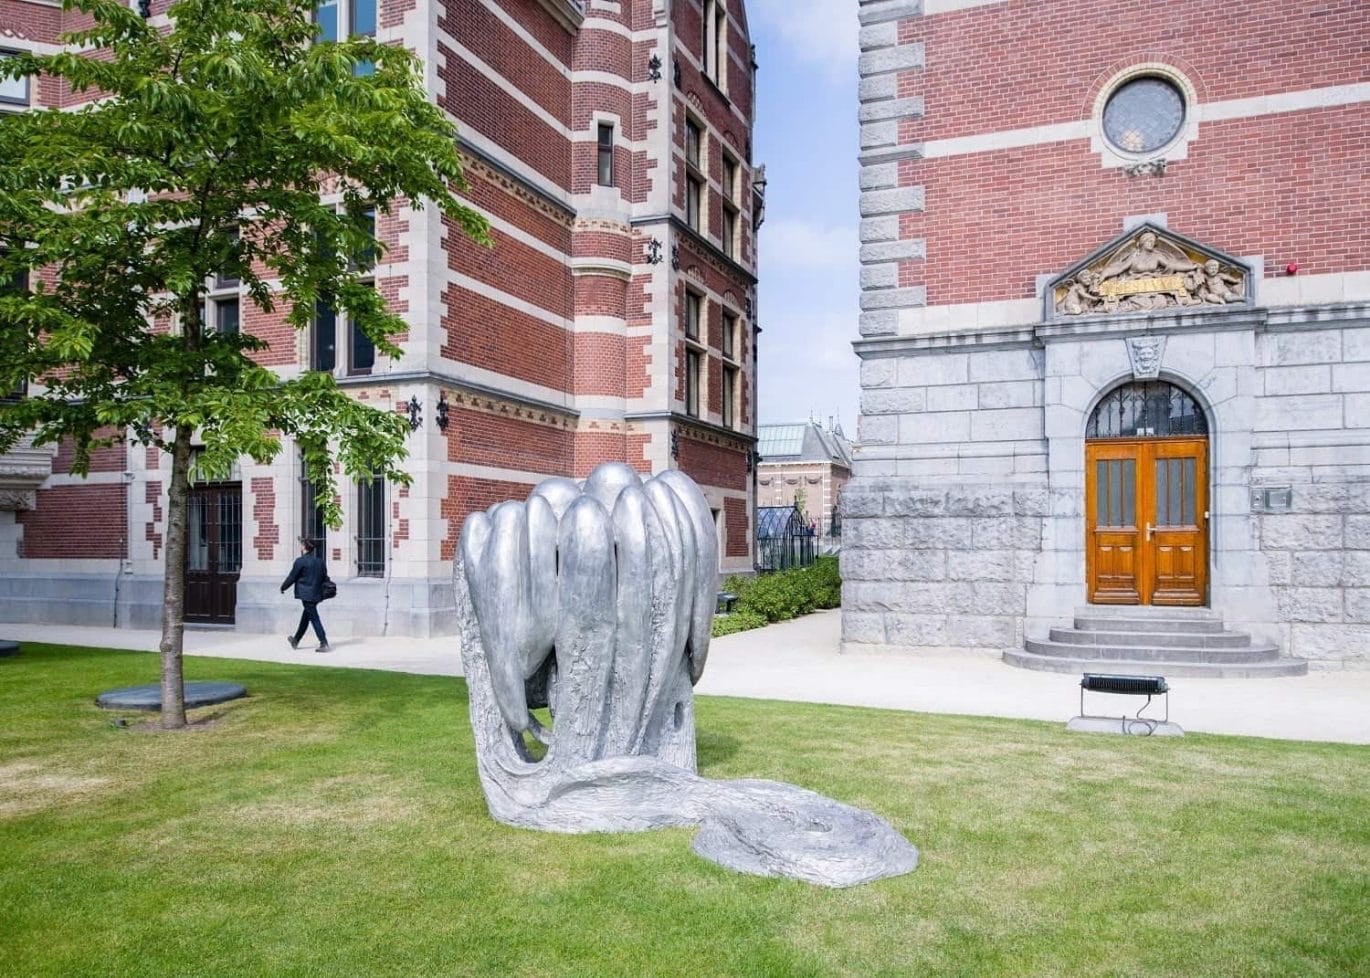 Louise Bourgeois 'In and out #2' 1995-1996, Easton Foundation. Foto: Antoine van Kaam © The Easton Foundation/Pictoright, Amsterdam